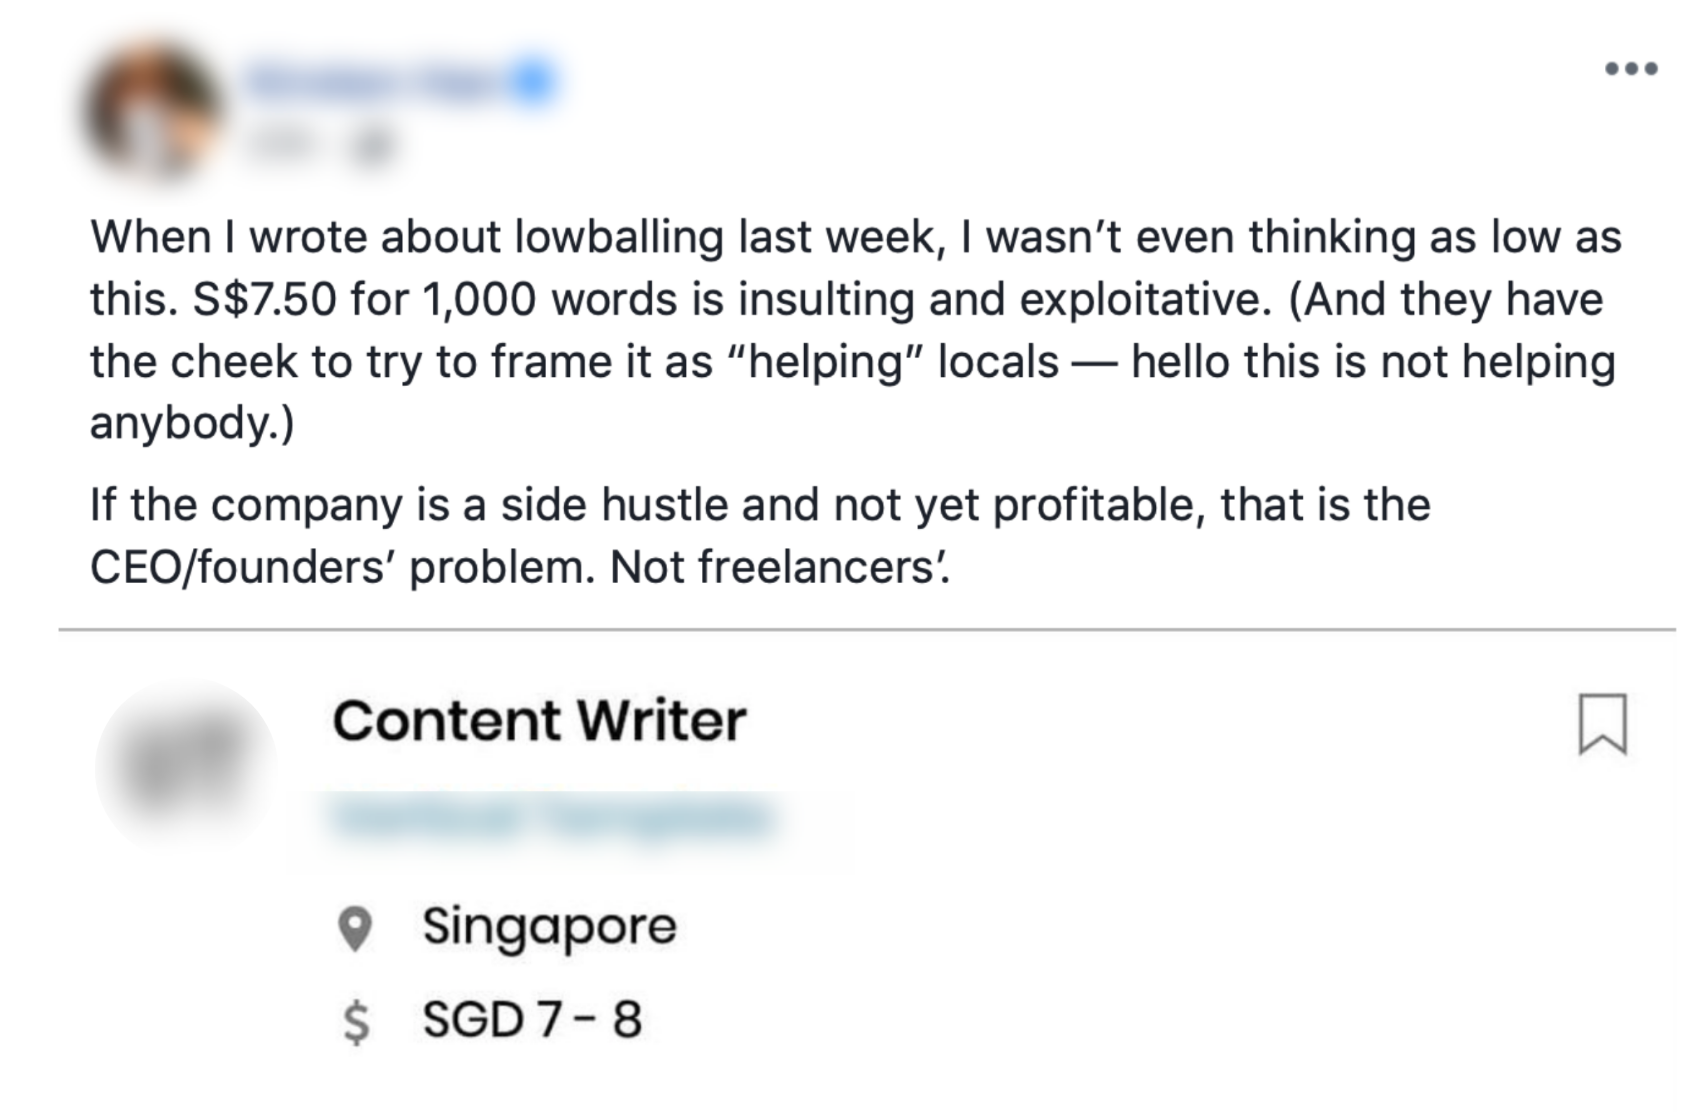 Facebook post of company lowballing for $7.50 for 1,000 words